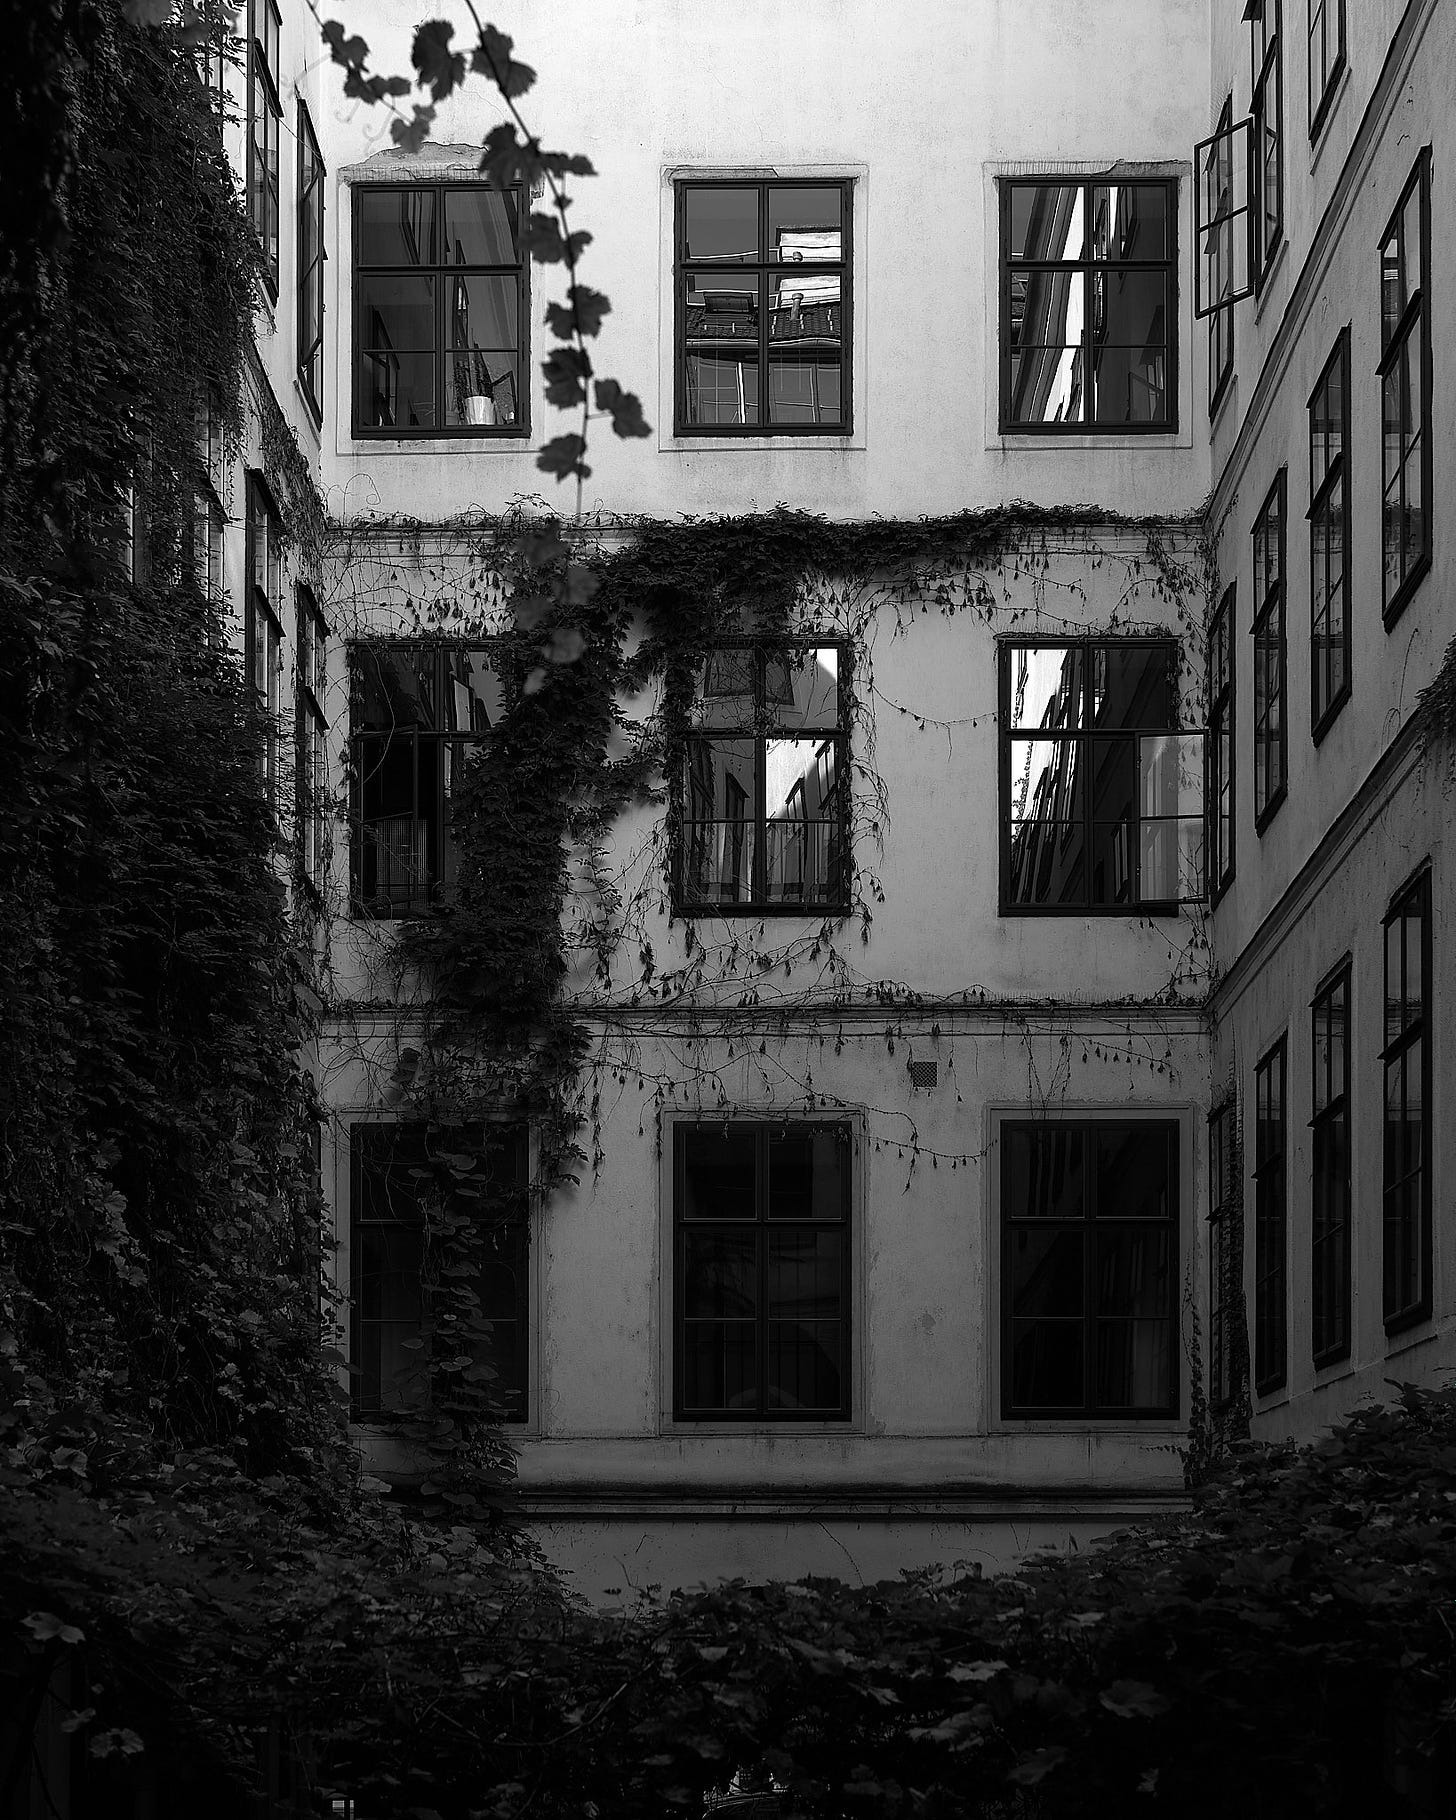 A monochrome photograph of an old building with multiple windows. Vines and foliage grow densely on the exterior, partially covering some windows. The scene is lit in soft, natural light, casting shadows that enhance the texture and character of the building.